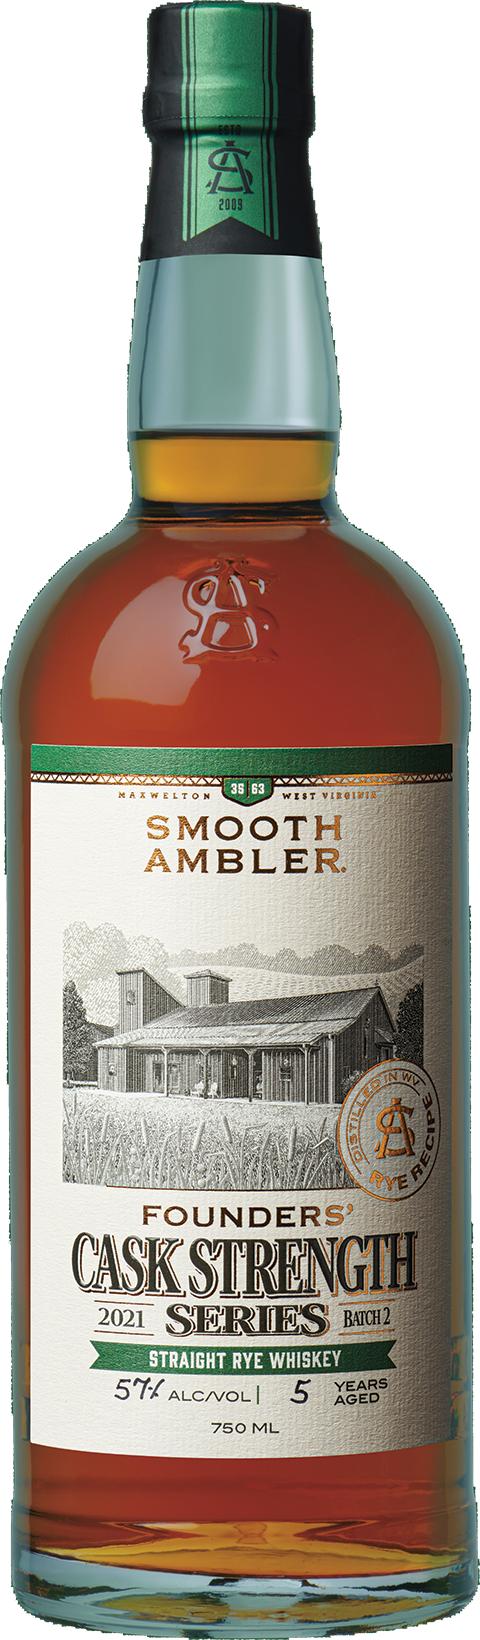 smooth-ambler-founders-cask-strength-straight-rye-whiskey-page-bottle-Full